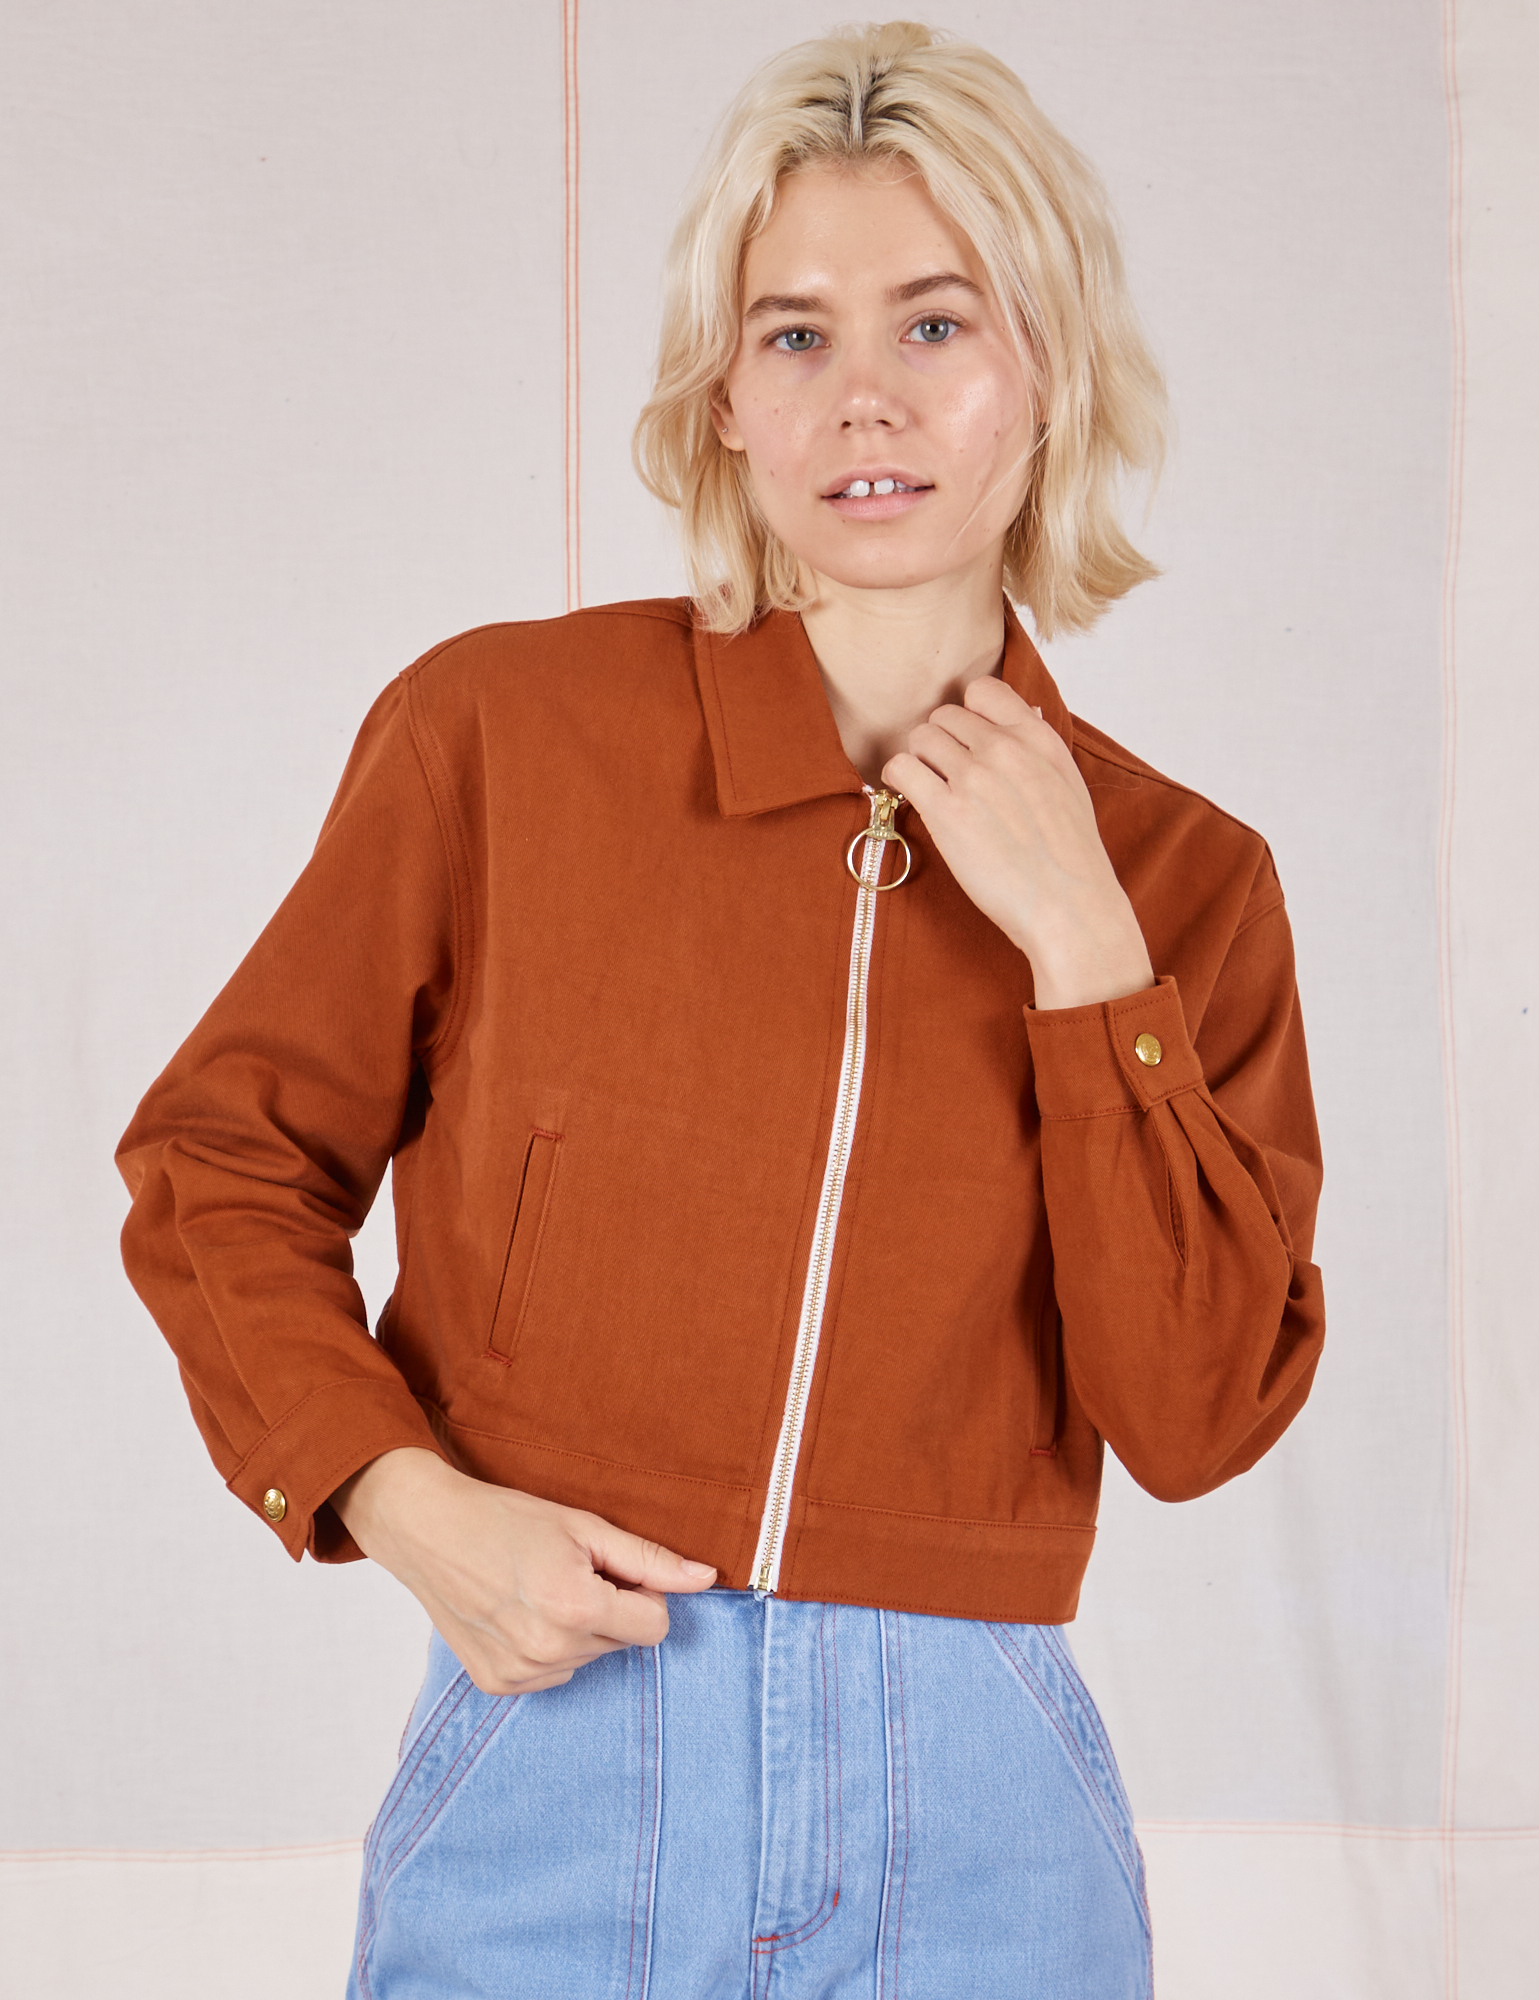 Madeline is wearing a zipped up Ricky Jacket in Burnt Terracotta